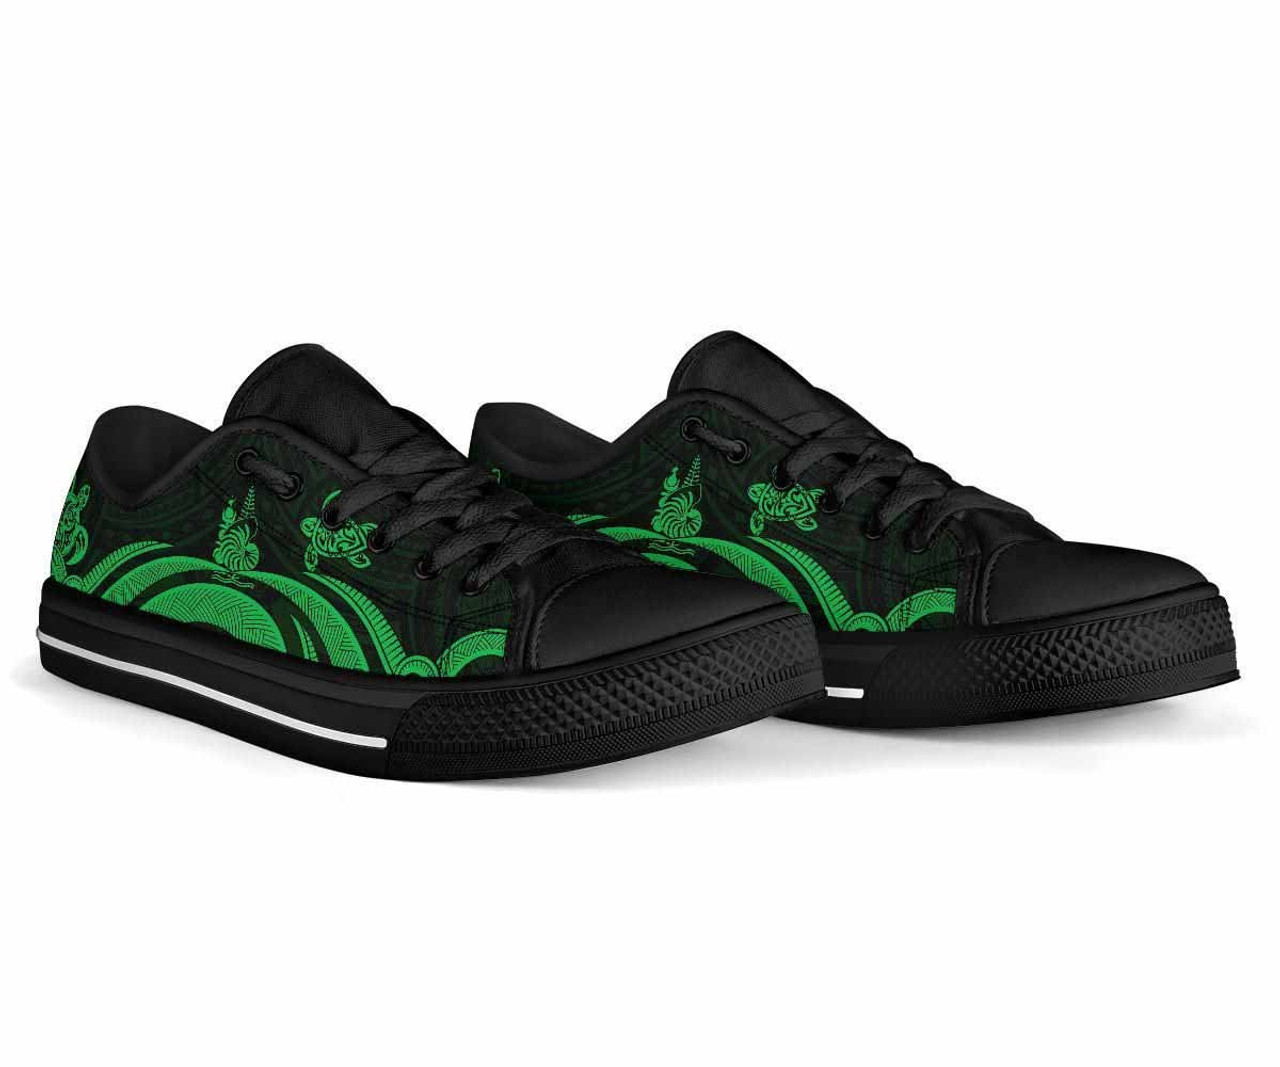 New Caledonia Low Top Canvas Shoes - Green Tentacle Turtle 2